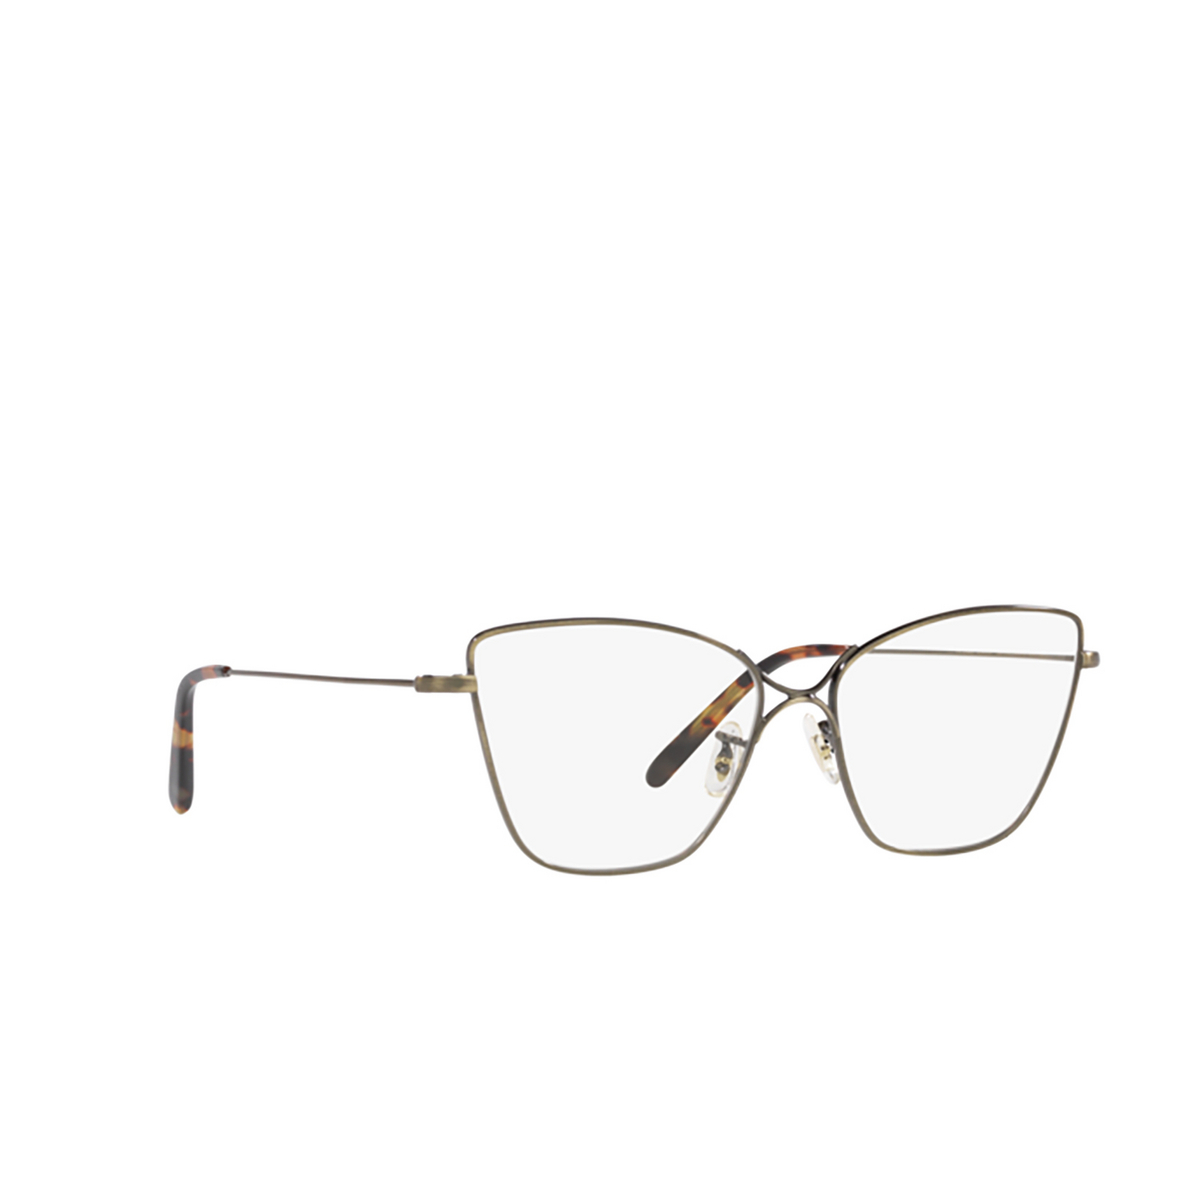 Oliver Peoples MARLYSE Sunglasses 5284SB Antique gold - three-quarters view